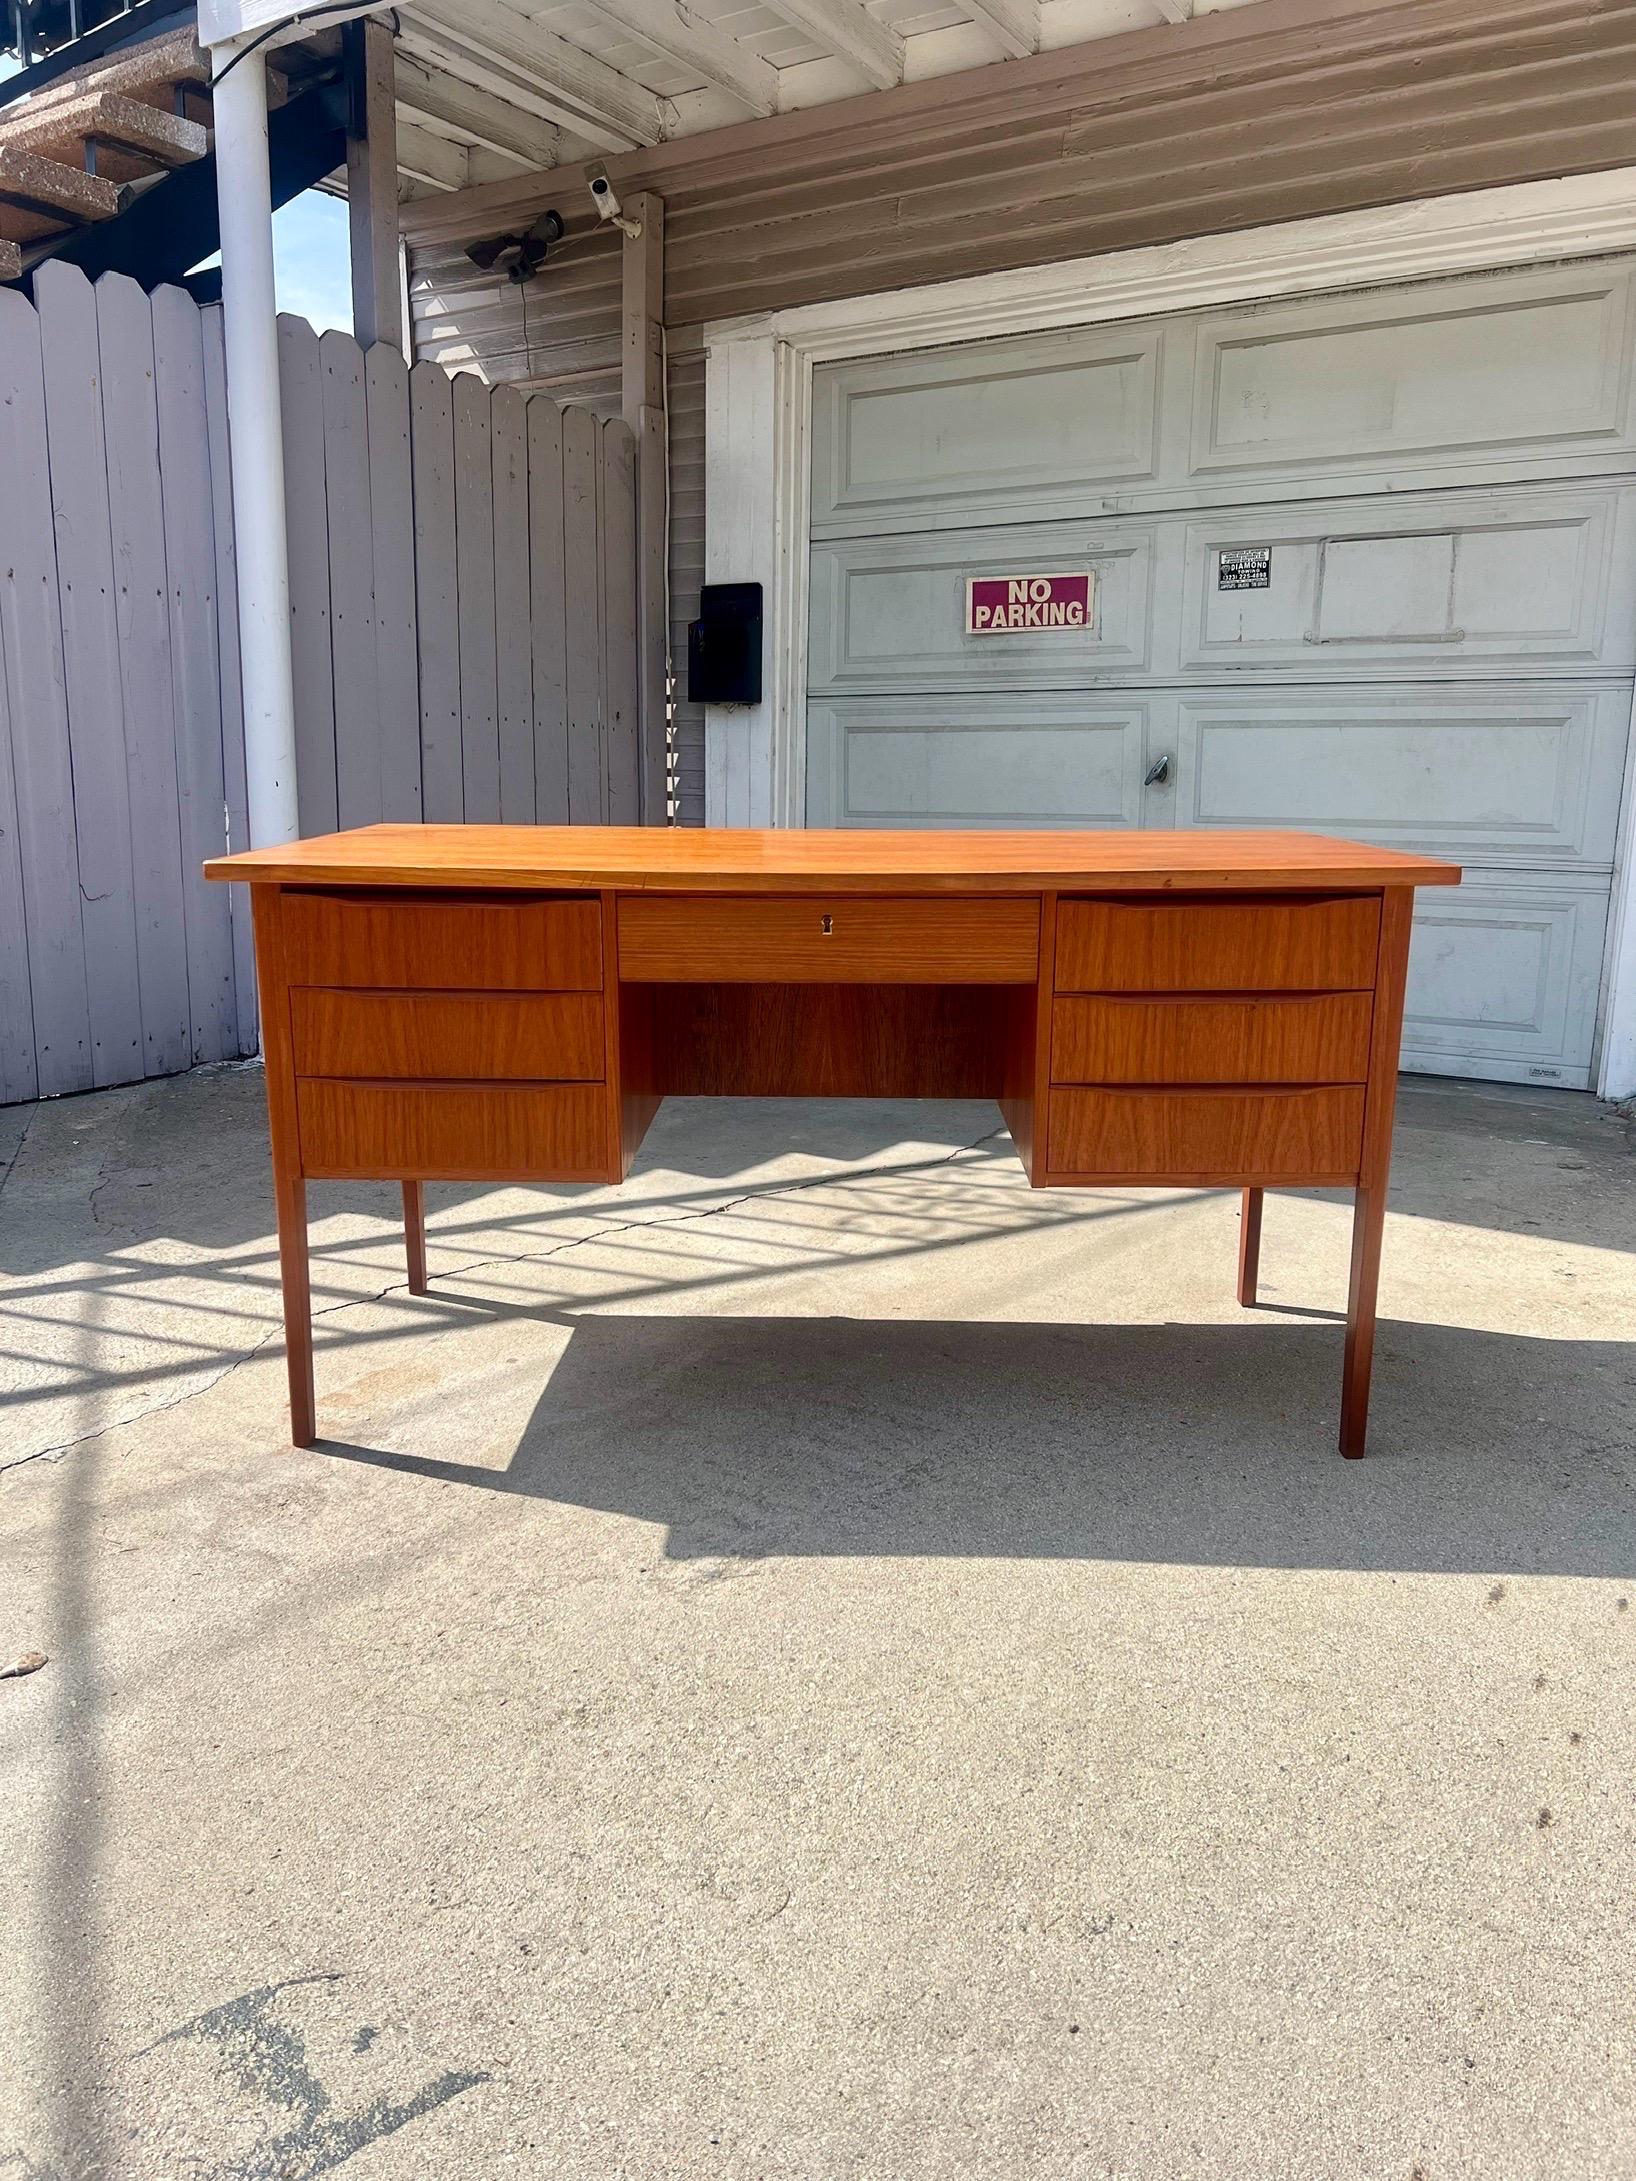 This gorgeous danish designed desk features seven drawers and id dual-sided. Can be floated in an office or study, or placed against a wall. The classic danish design seamlessly merges form and function for a workspace. Overall excellent vintage